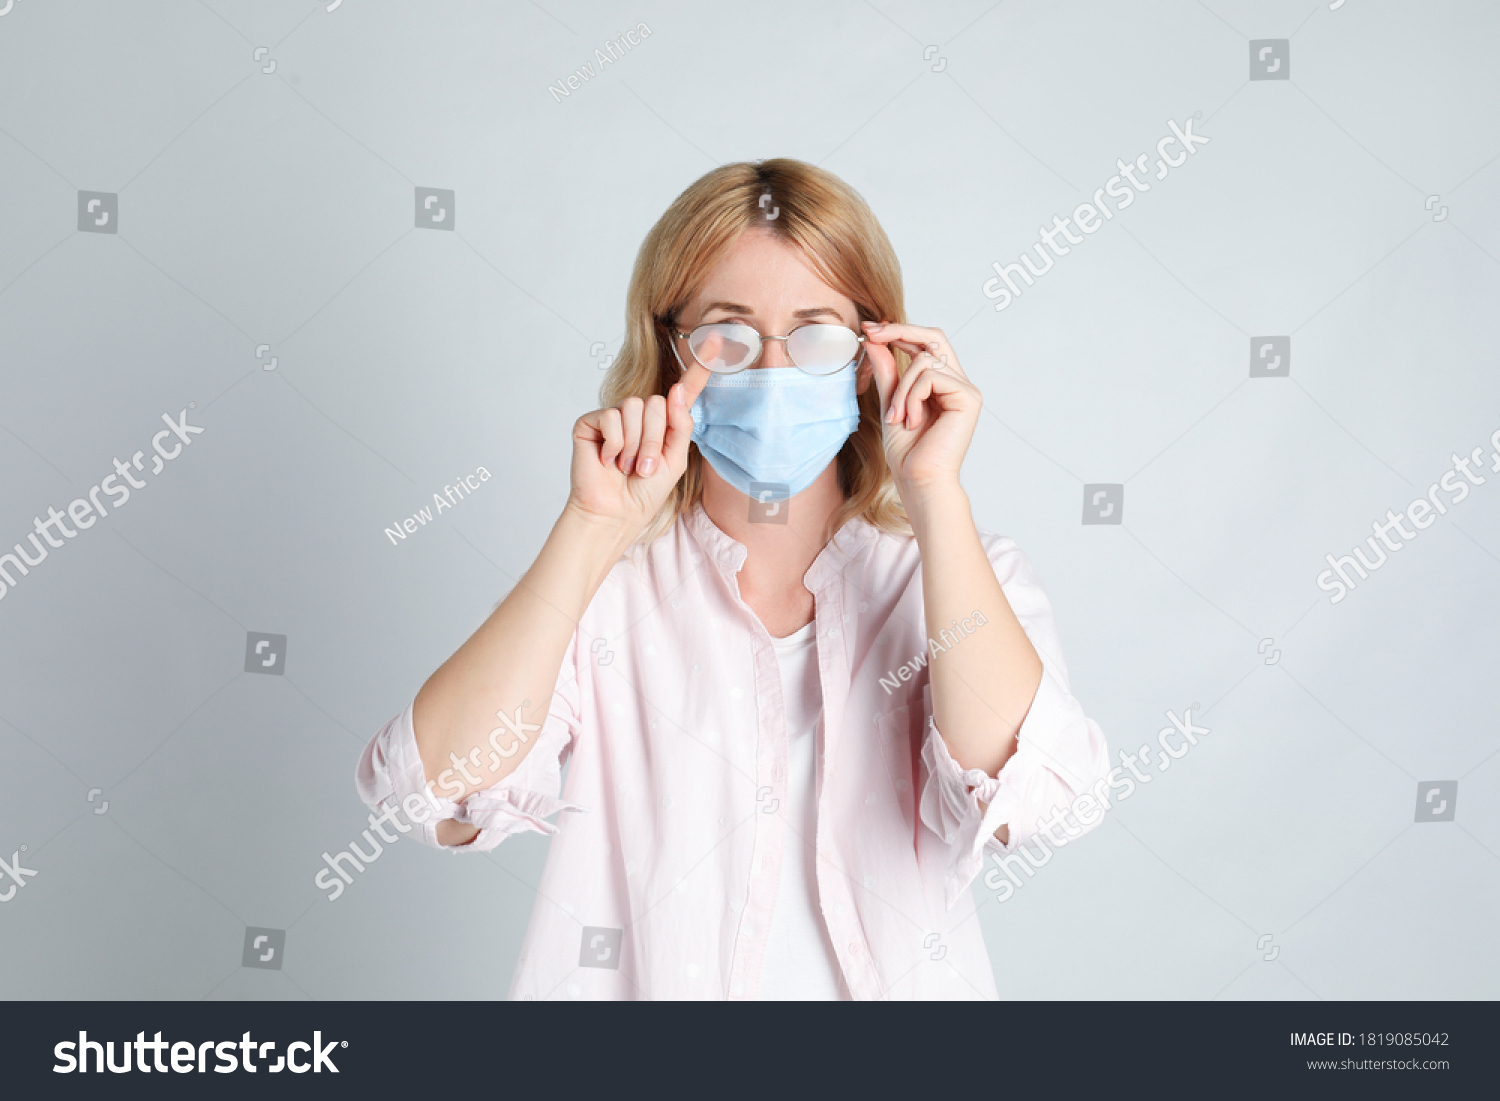 Woman wiping foggy glasses caused by wearing medical mask on light background #1819085042